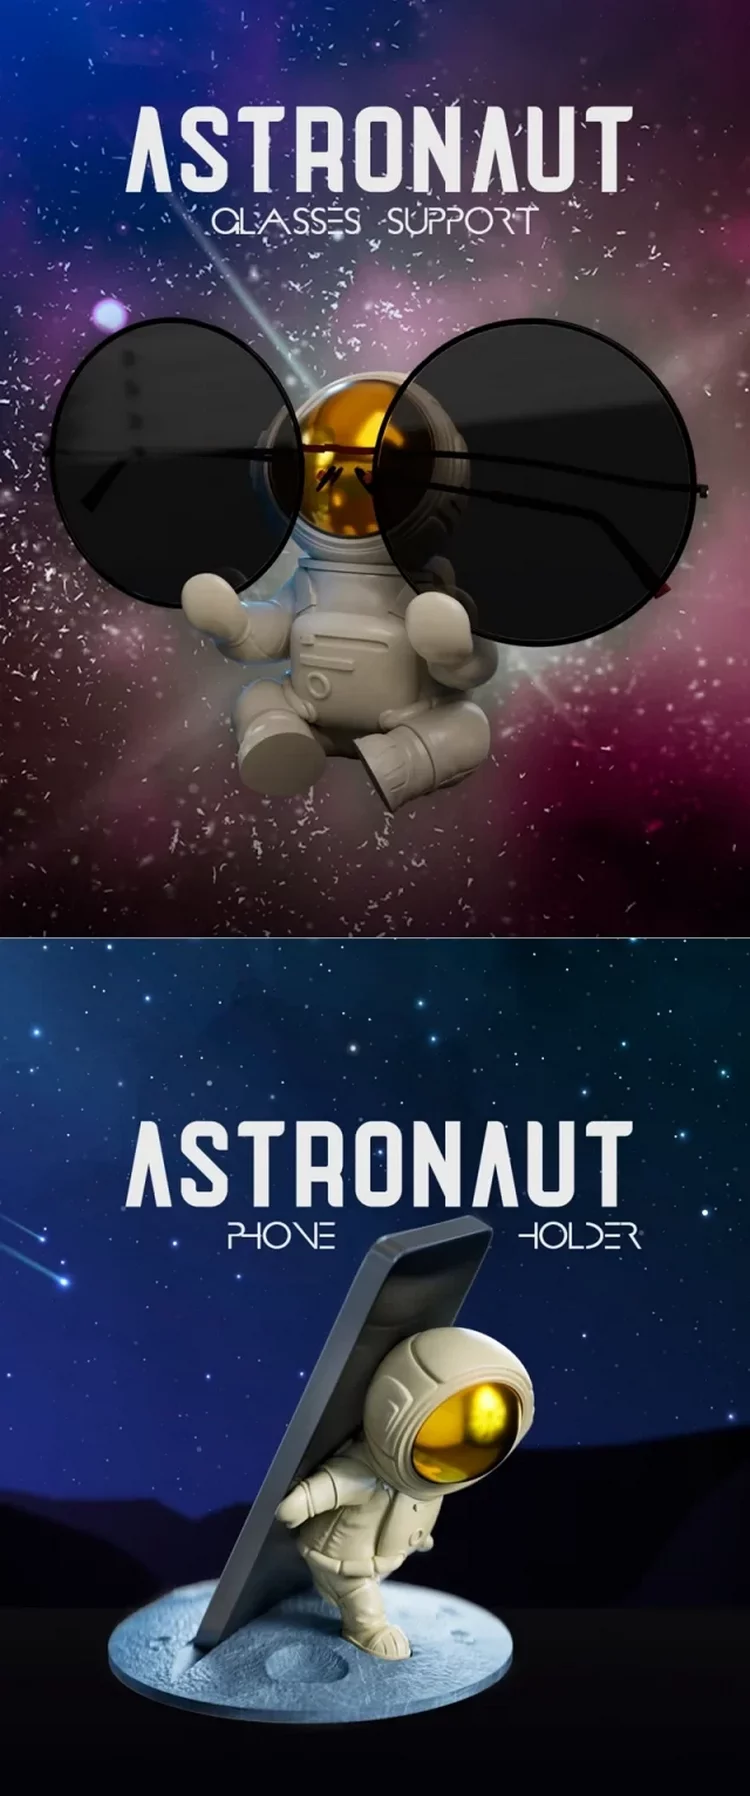 Astronaut Glasses and Astronaut Phone